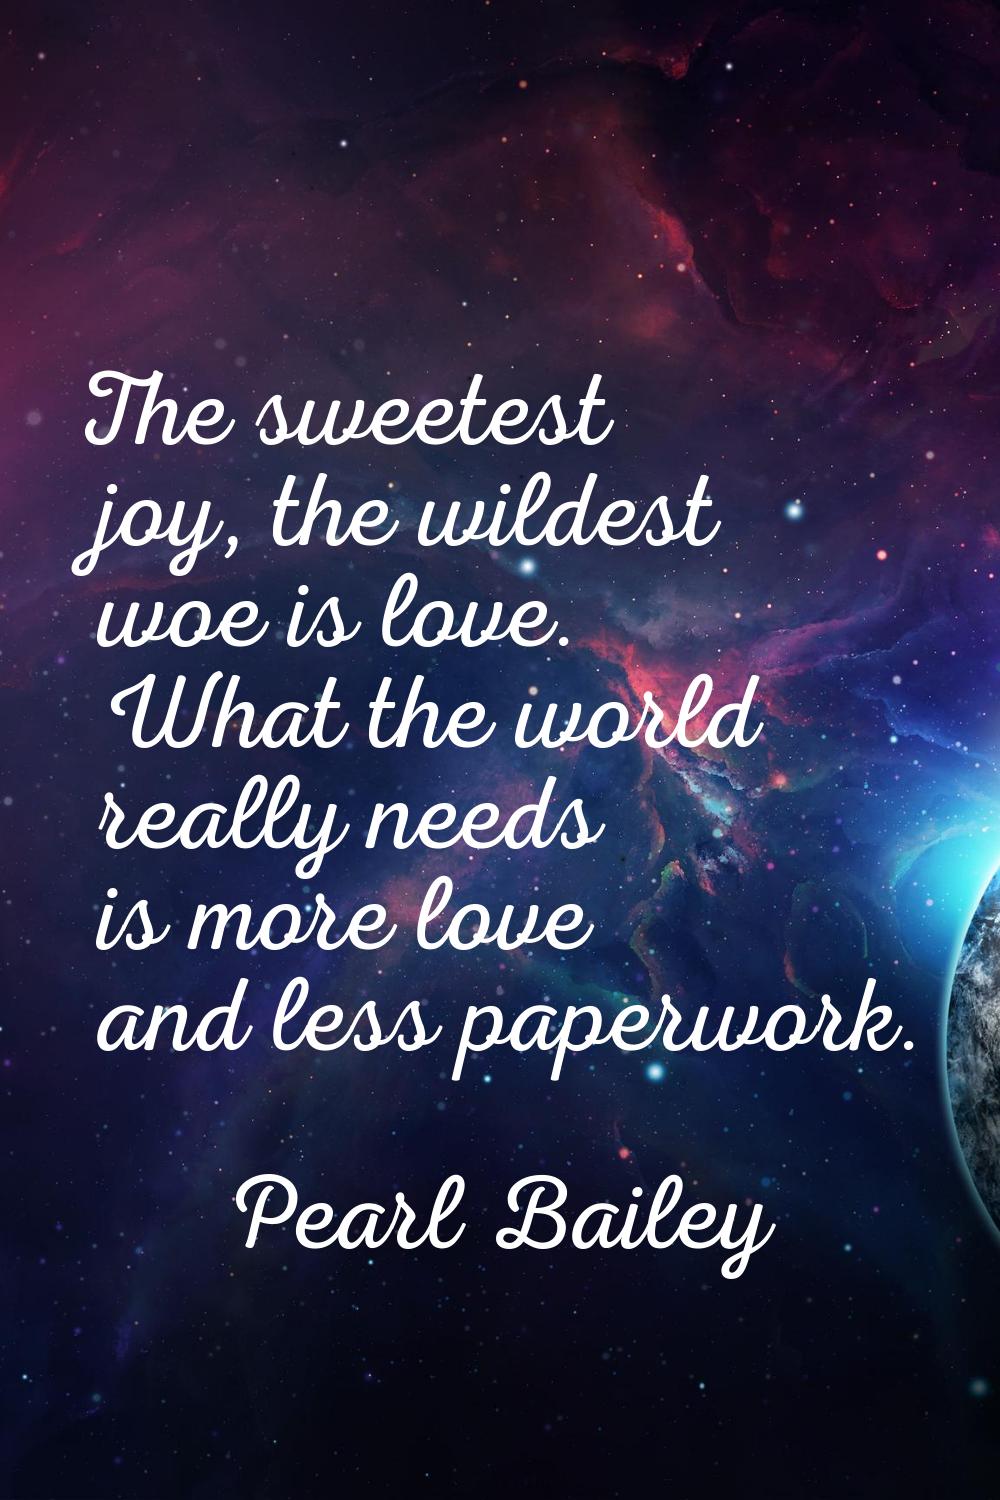 The sweetest joy, the wildest woe is love. What the world really needs is more love and less paperw